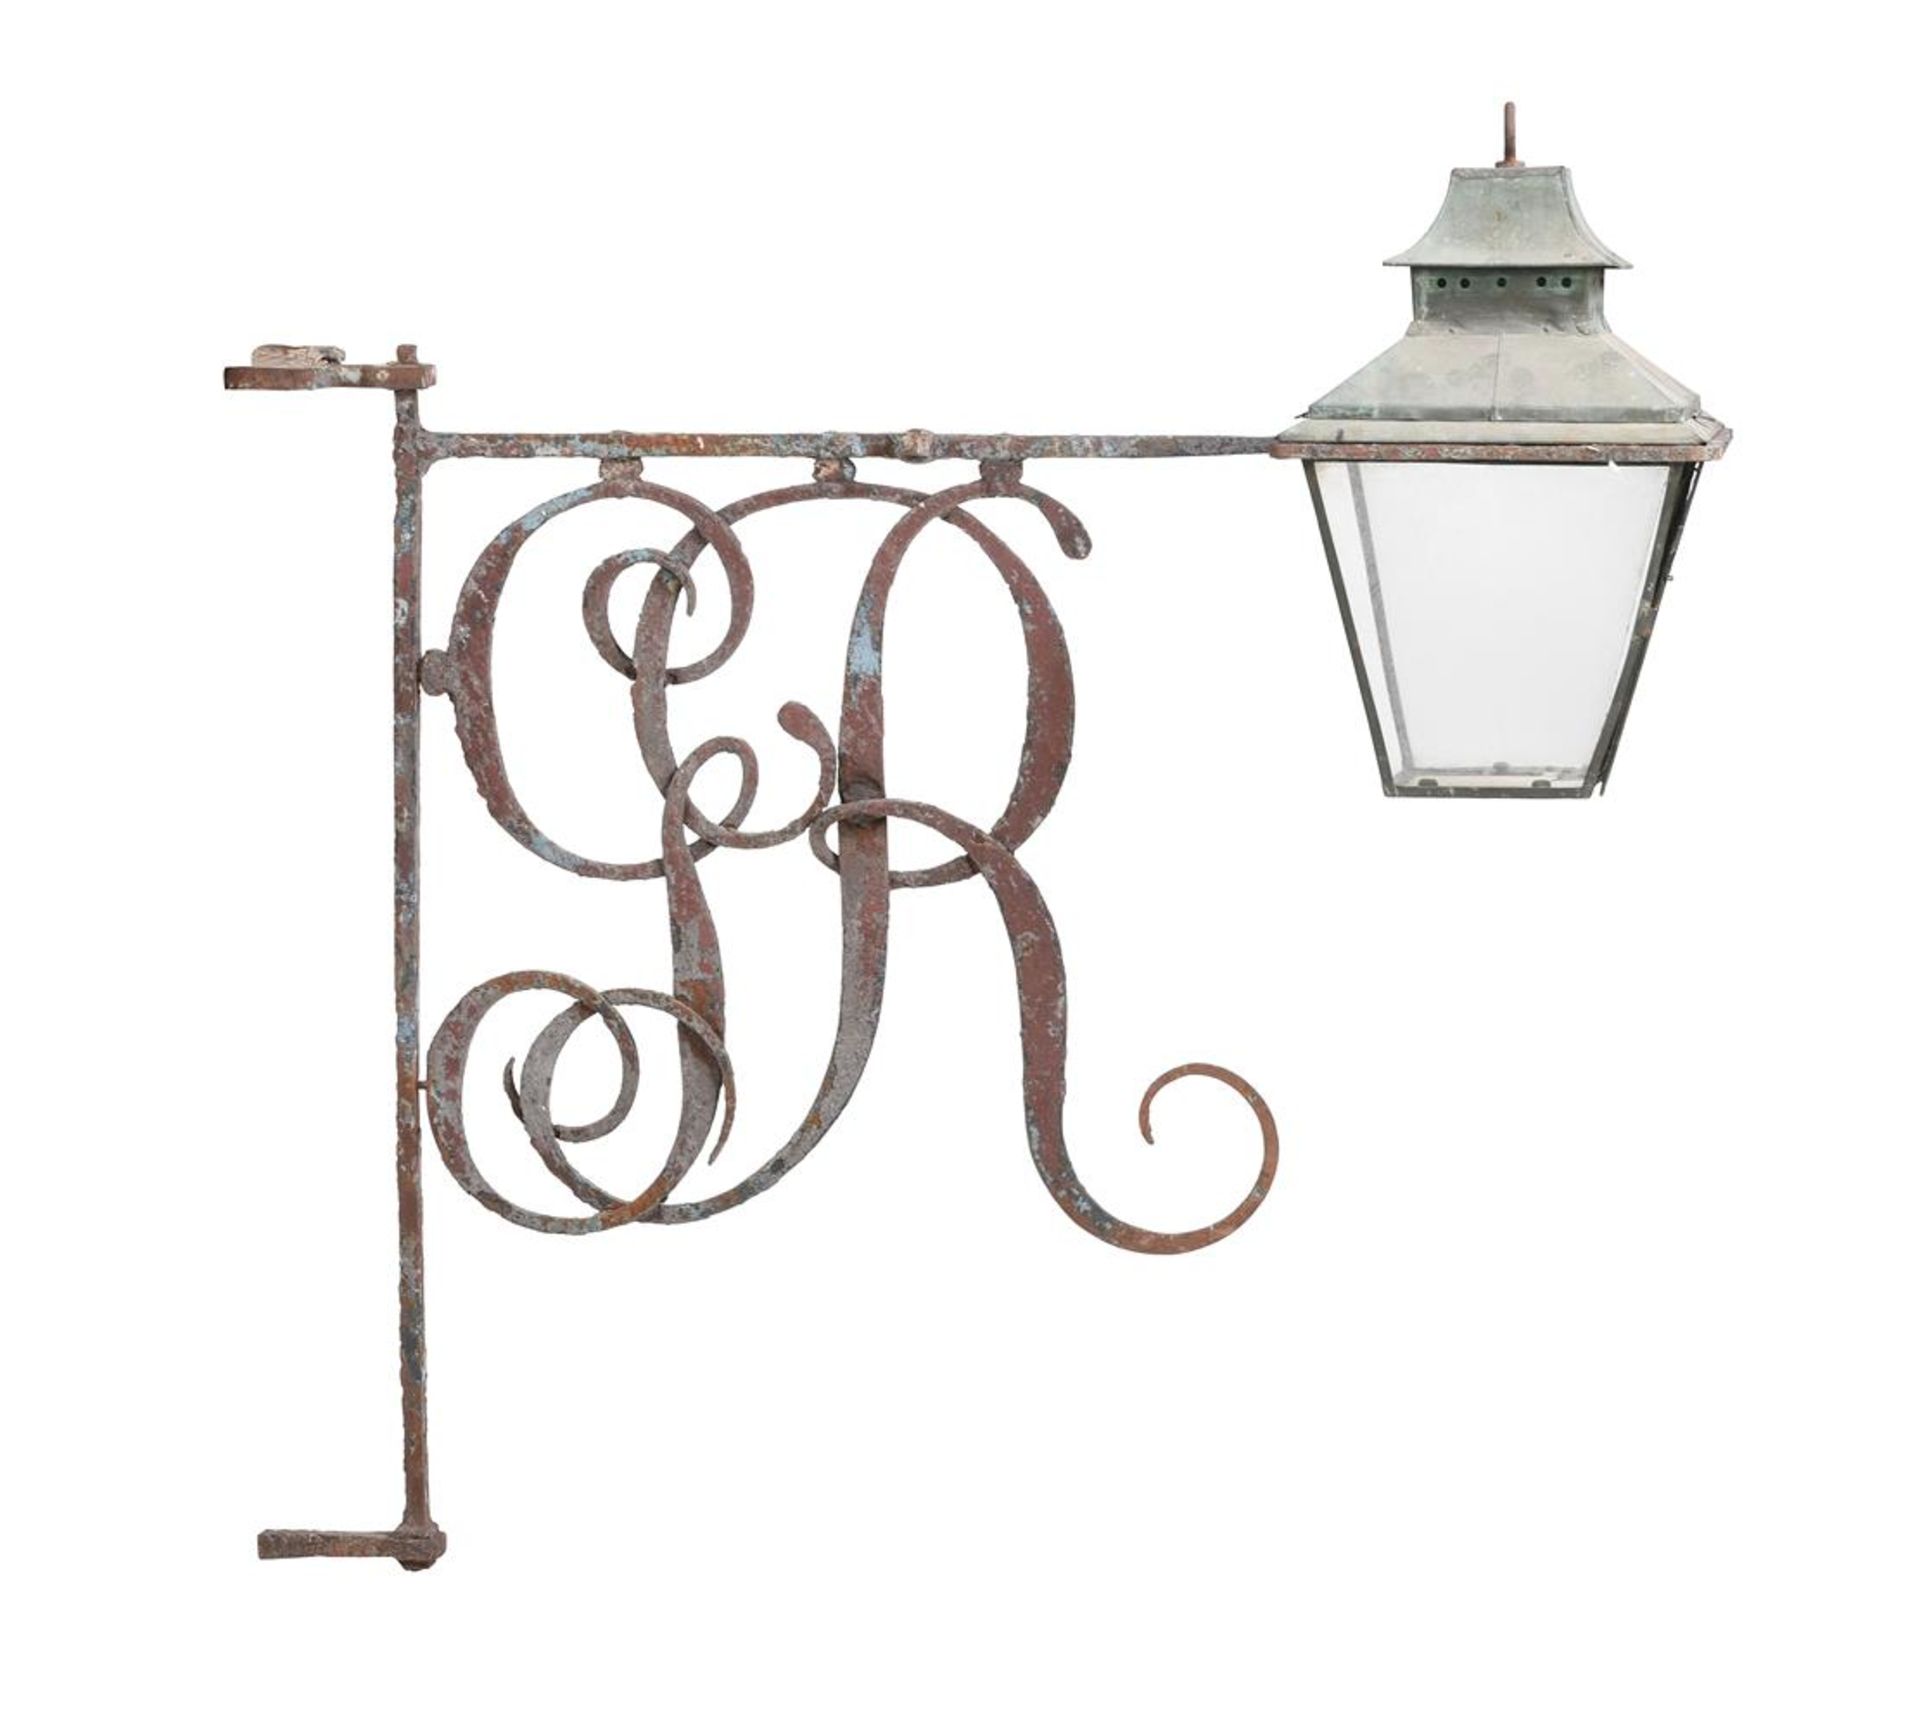 A LARGE GEORGE III WROUGHT IRON CYPHER LANTERN BRACKET, LATE 18TH OR EARLY 19TH CENTURY